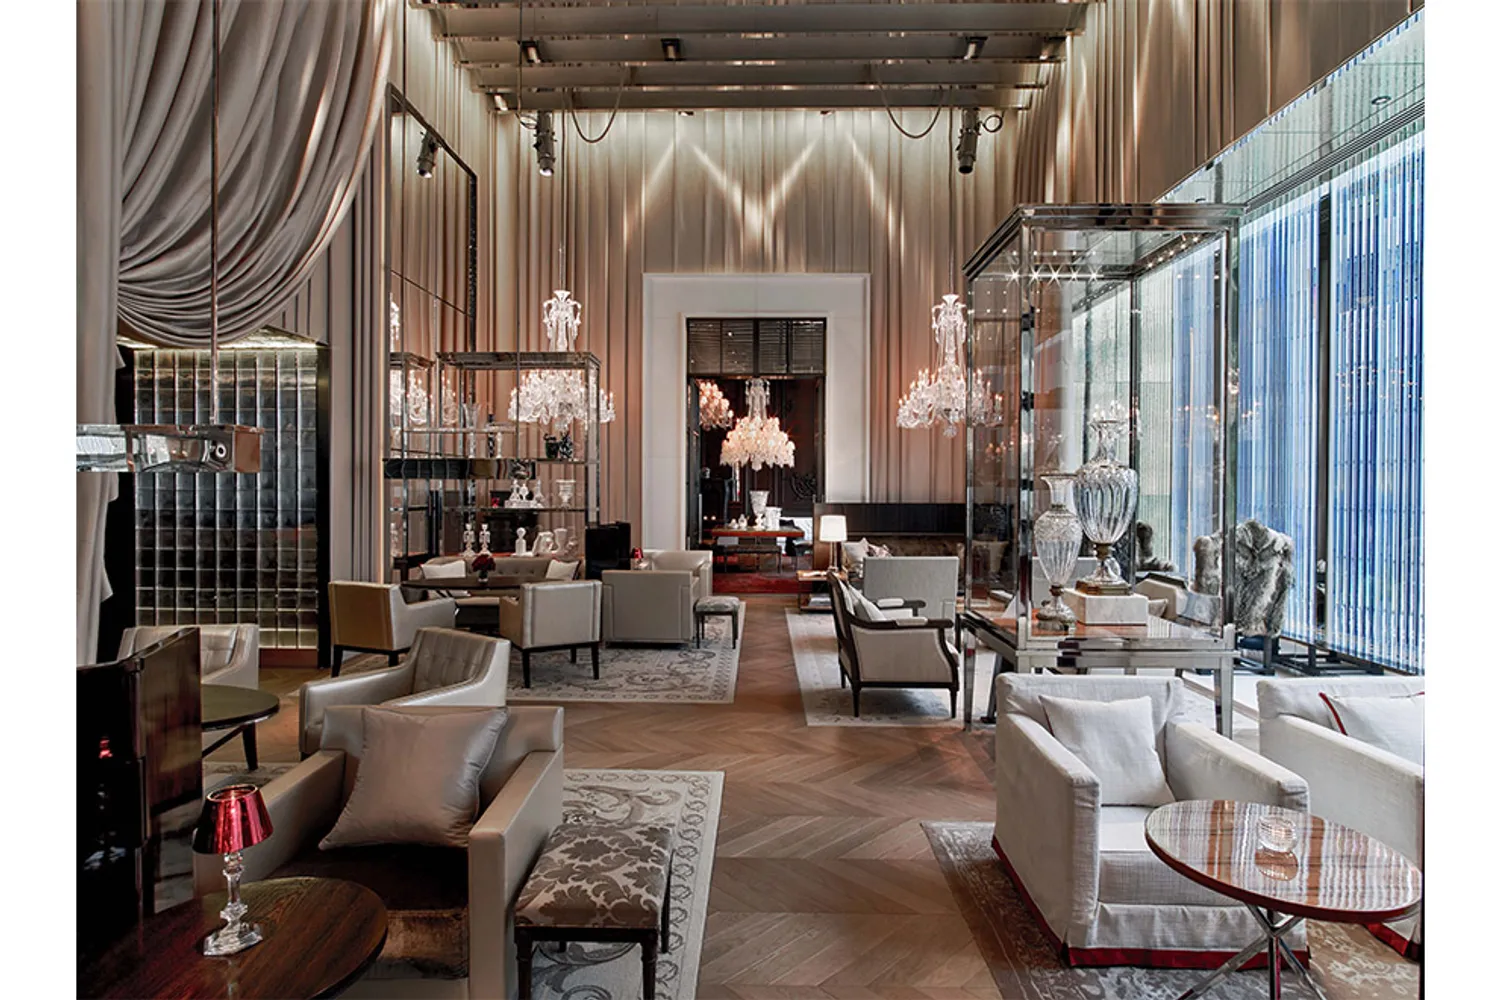 The exquisite Grand Salon at the Baccarat Hotel